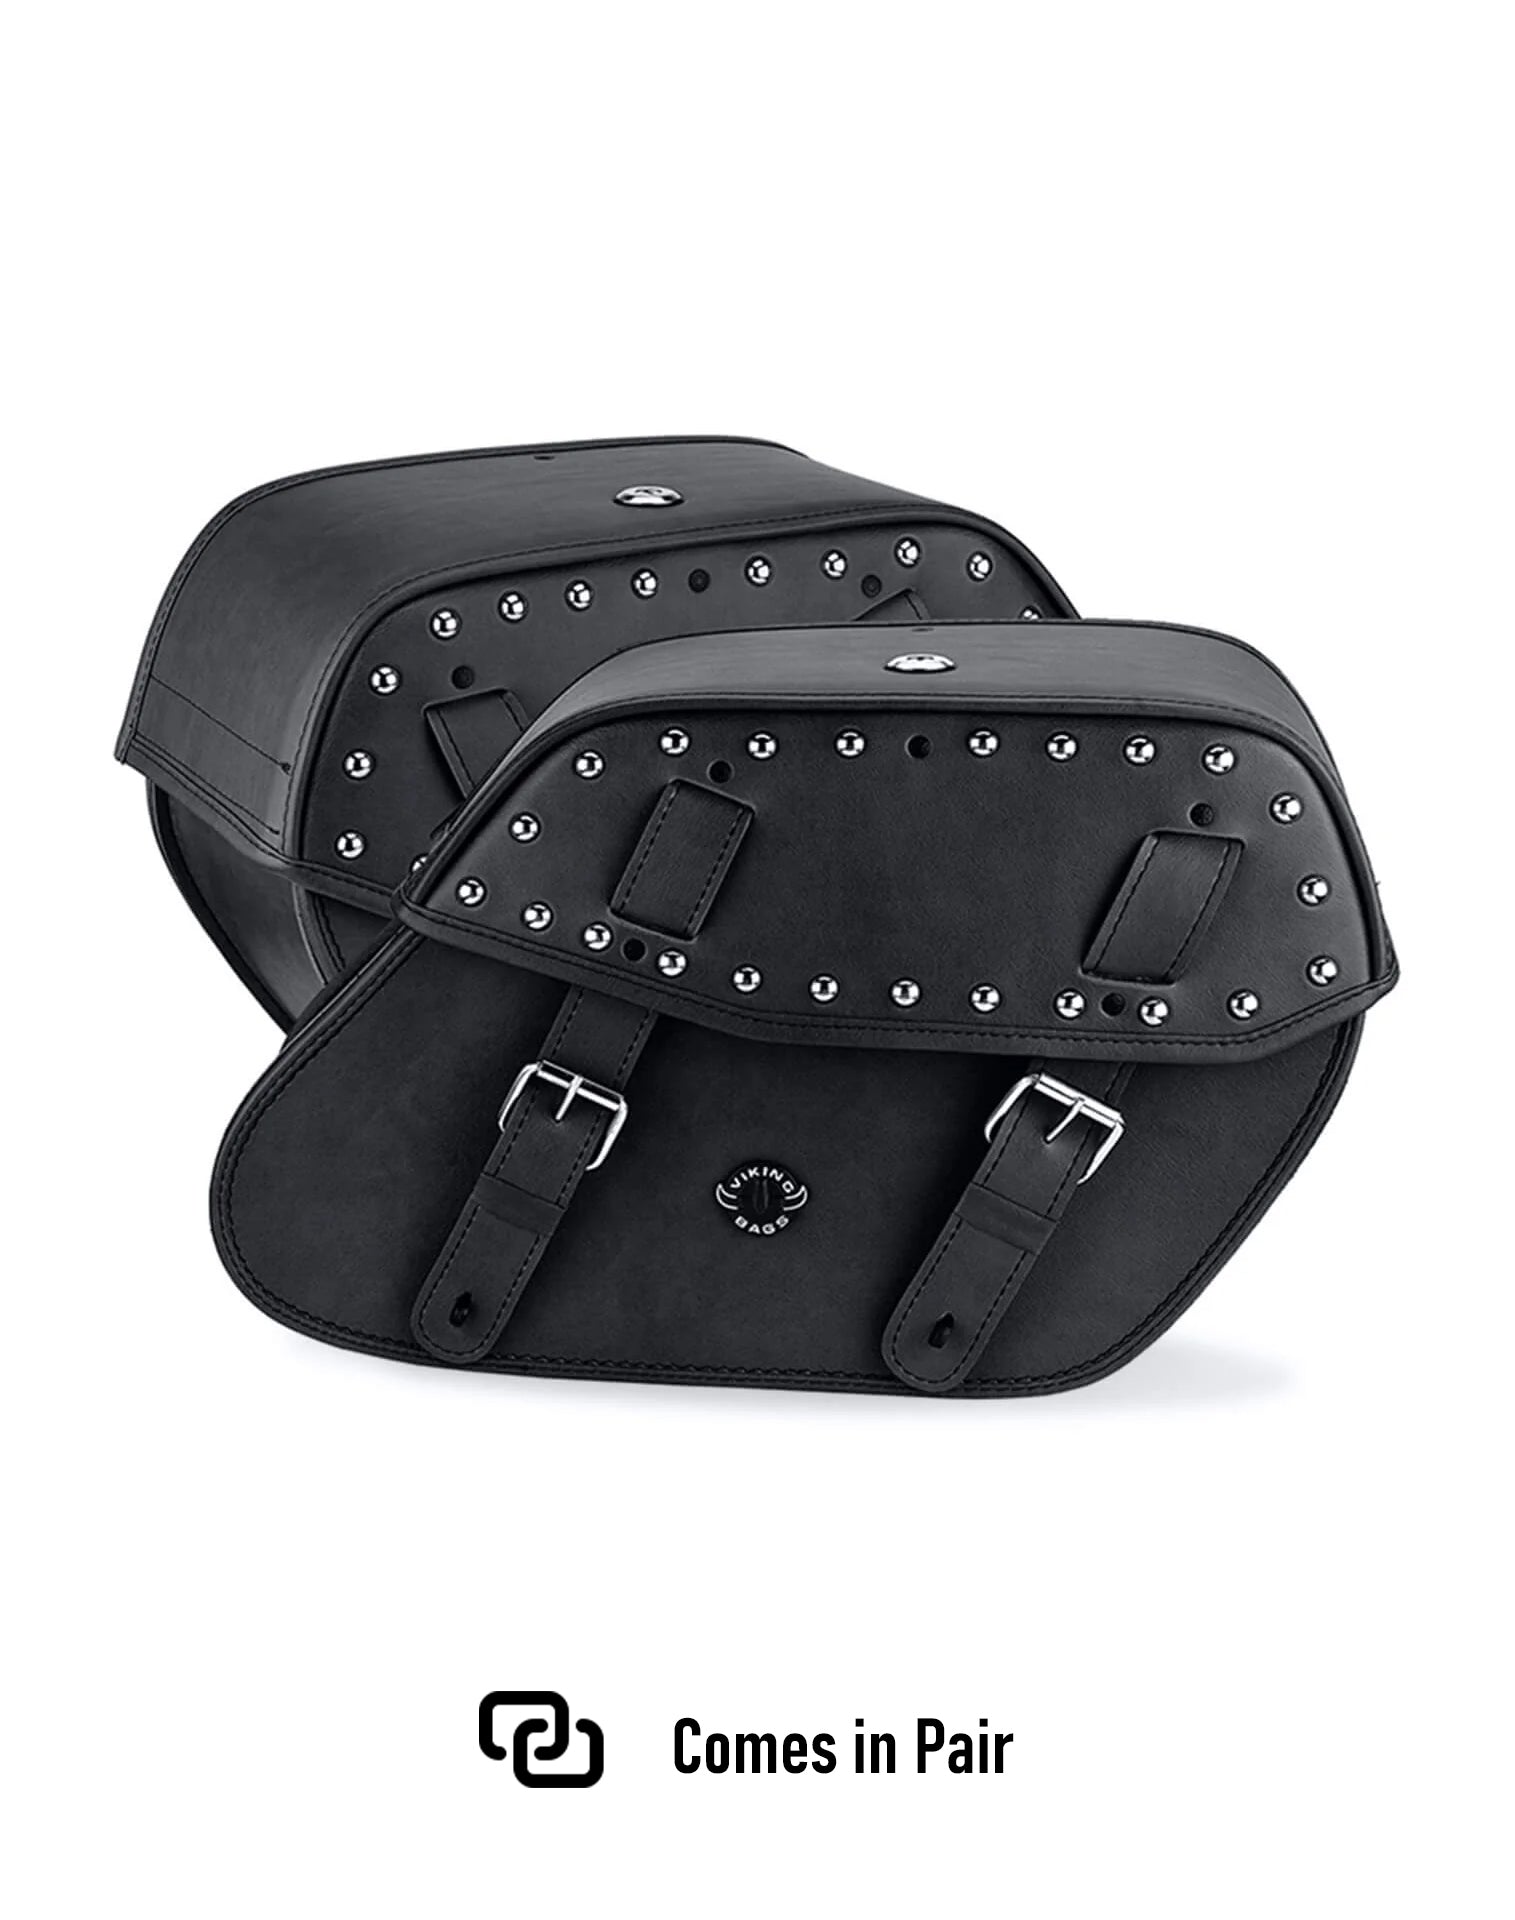 Viking Odin Large Studded Leather Motorcycle Saddlebags For Harley Softail Sport Glide Flsb Weather Resistant Bags Comes in Pair